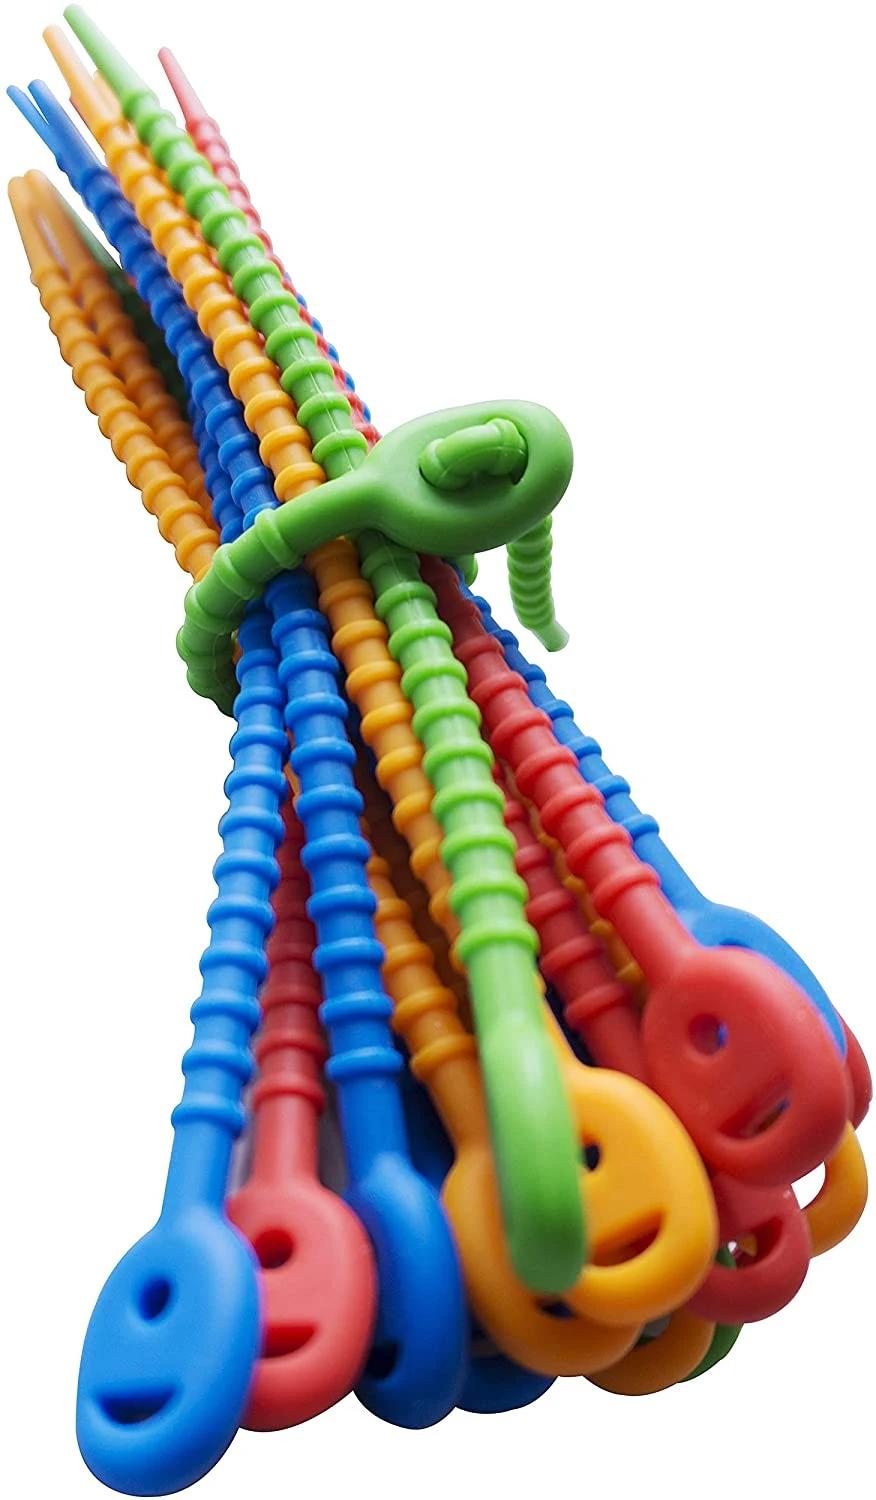 Colorful Silicone Twist Ties Bag Clip Cable Straps Bread Tie Household Snake Ties